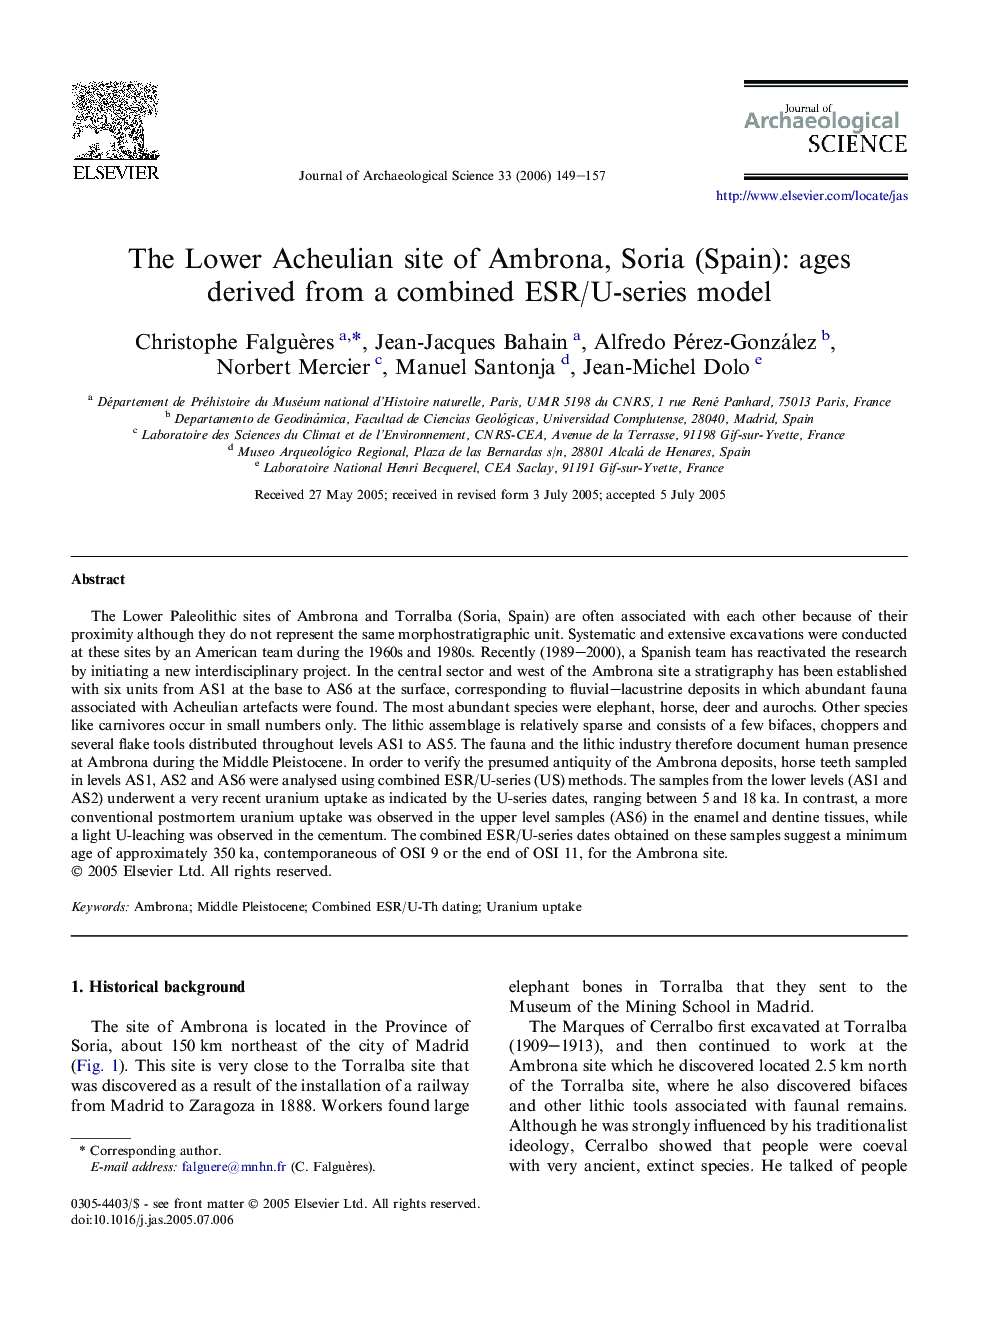 The Lower Acheulian site of Ambrona, Soria (Spain): ages derived from a combined ESR/U-series model